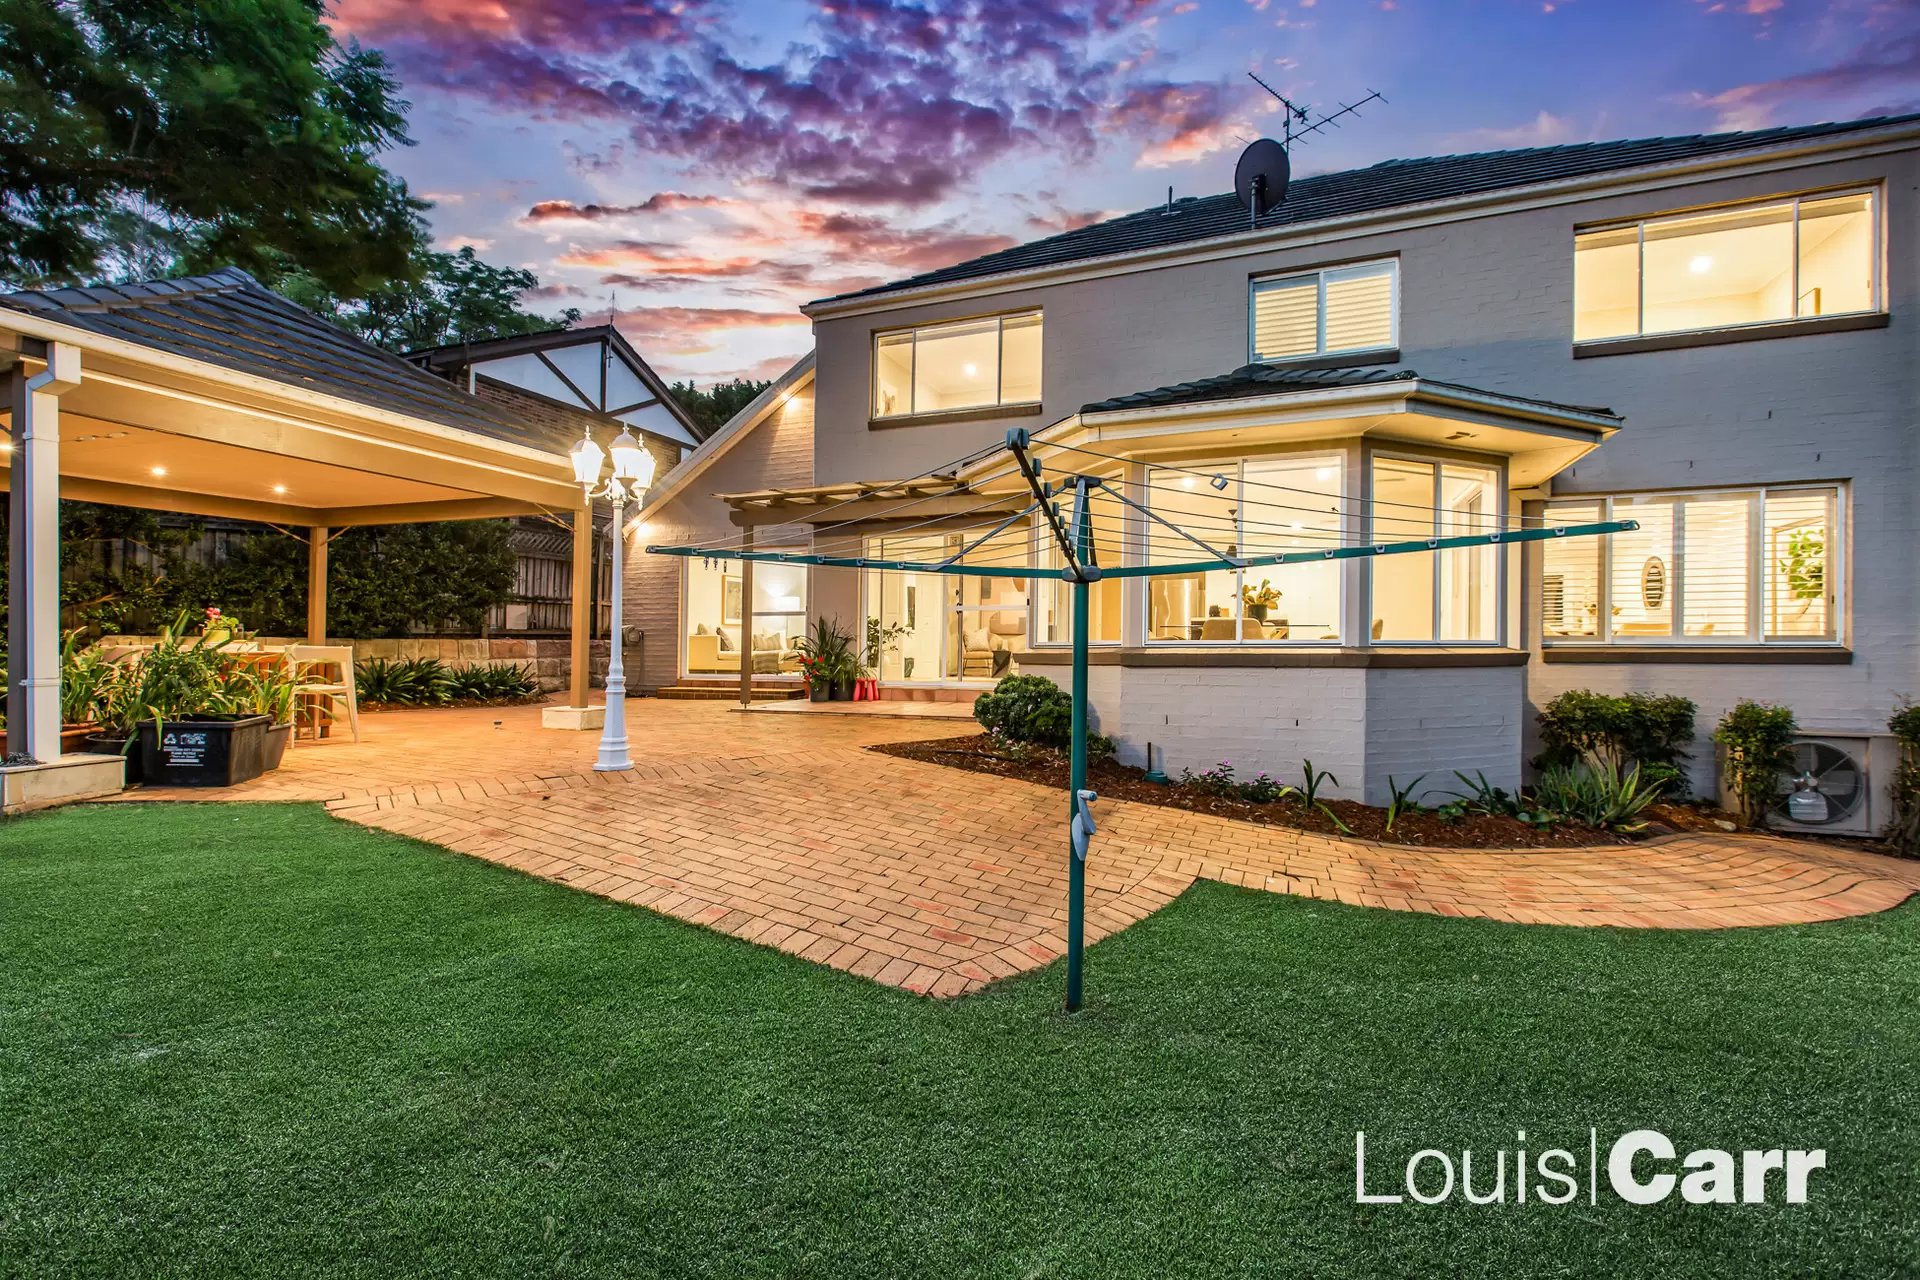 Photo #12: 138 Aiken Road, West Pennant Hills - For Sale by Louis Carr Real Estate